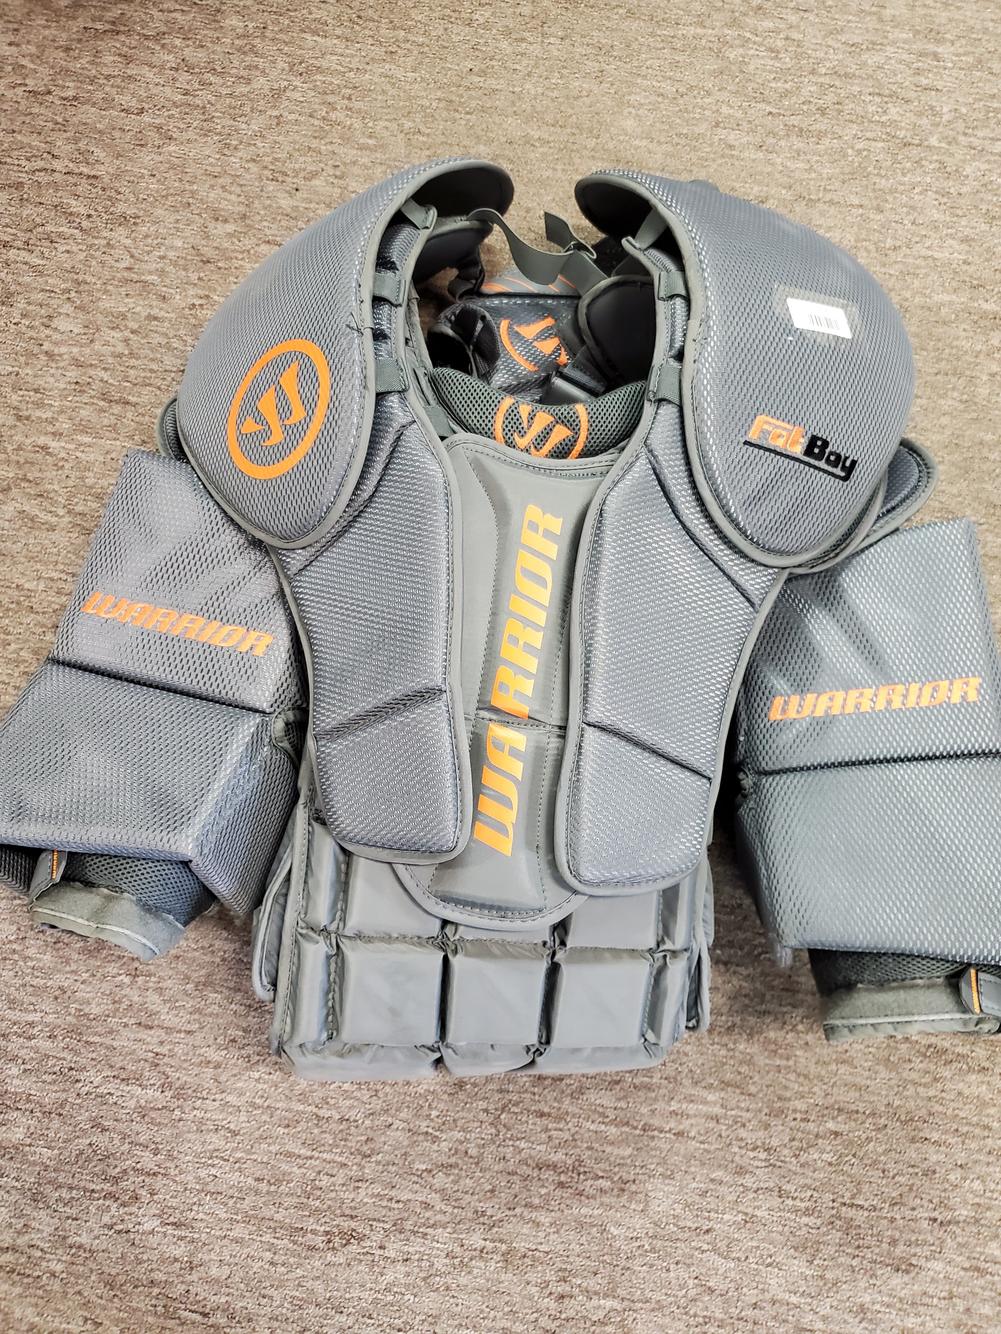 Warrior Fatboy Box Lacrosse Goalie Chest Protector